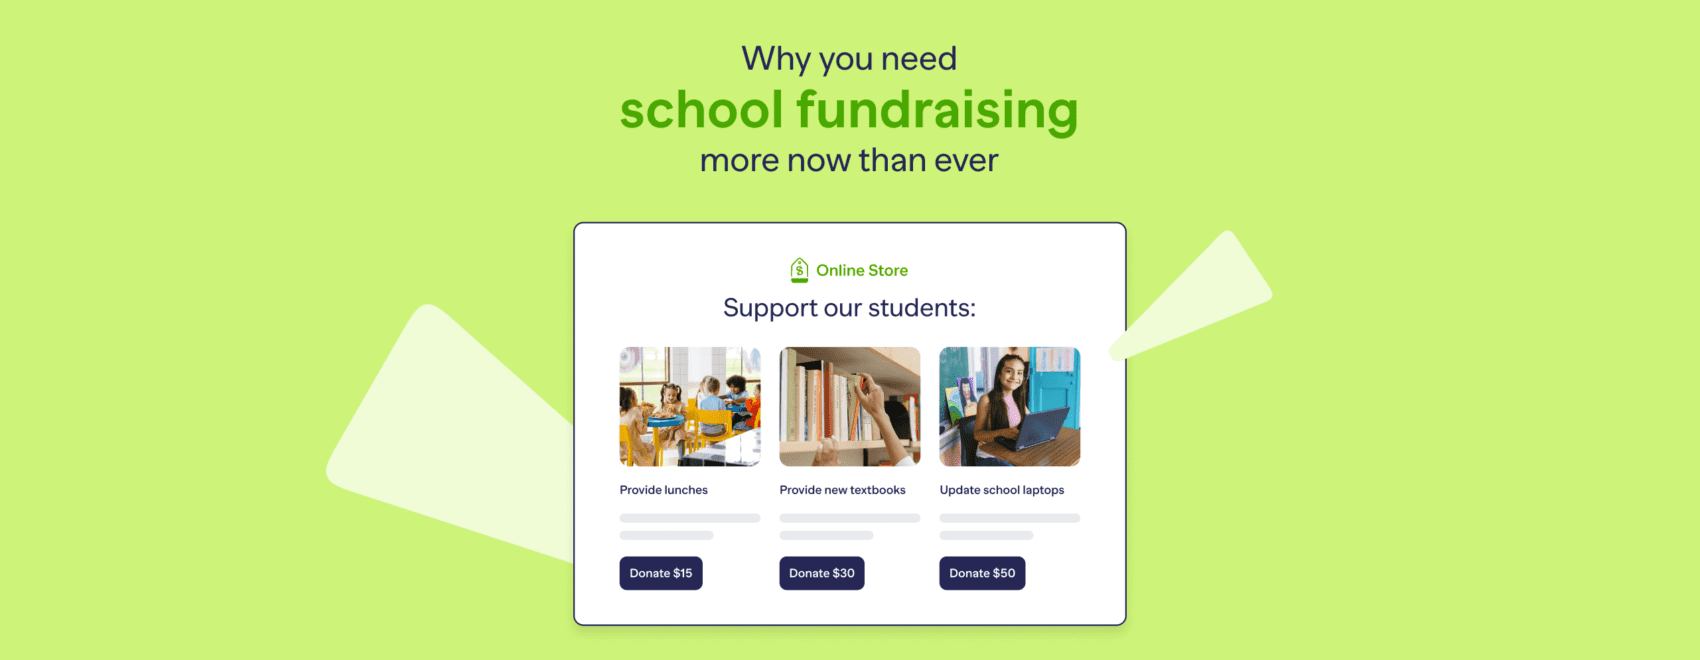 Why you need school fundraising more now than ever